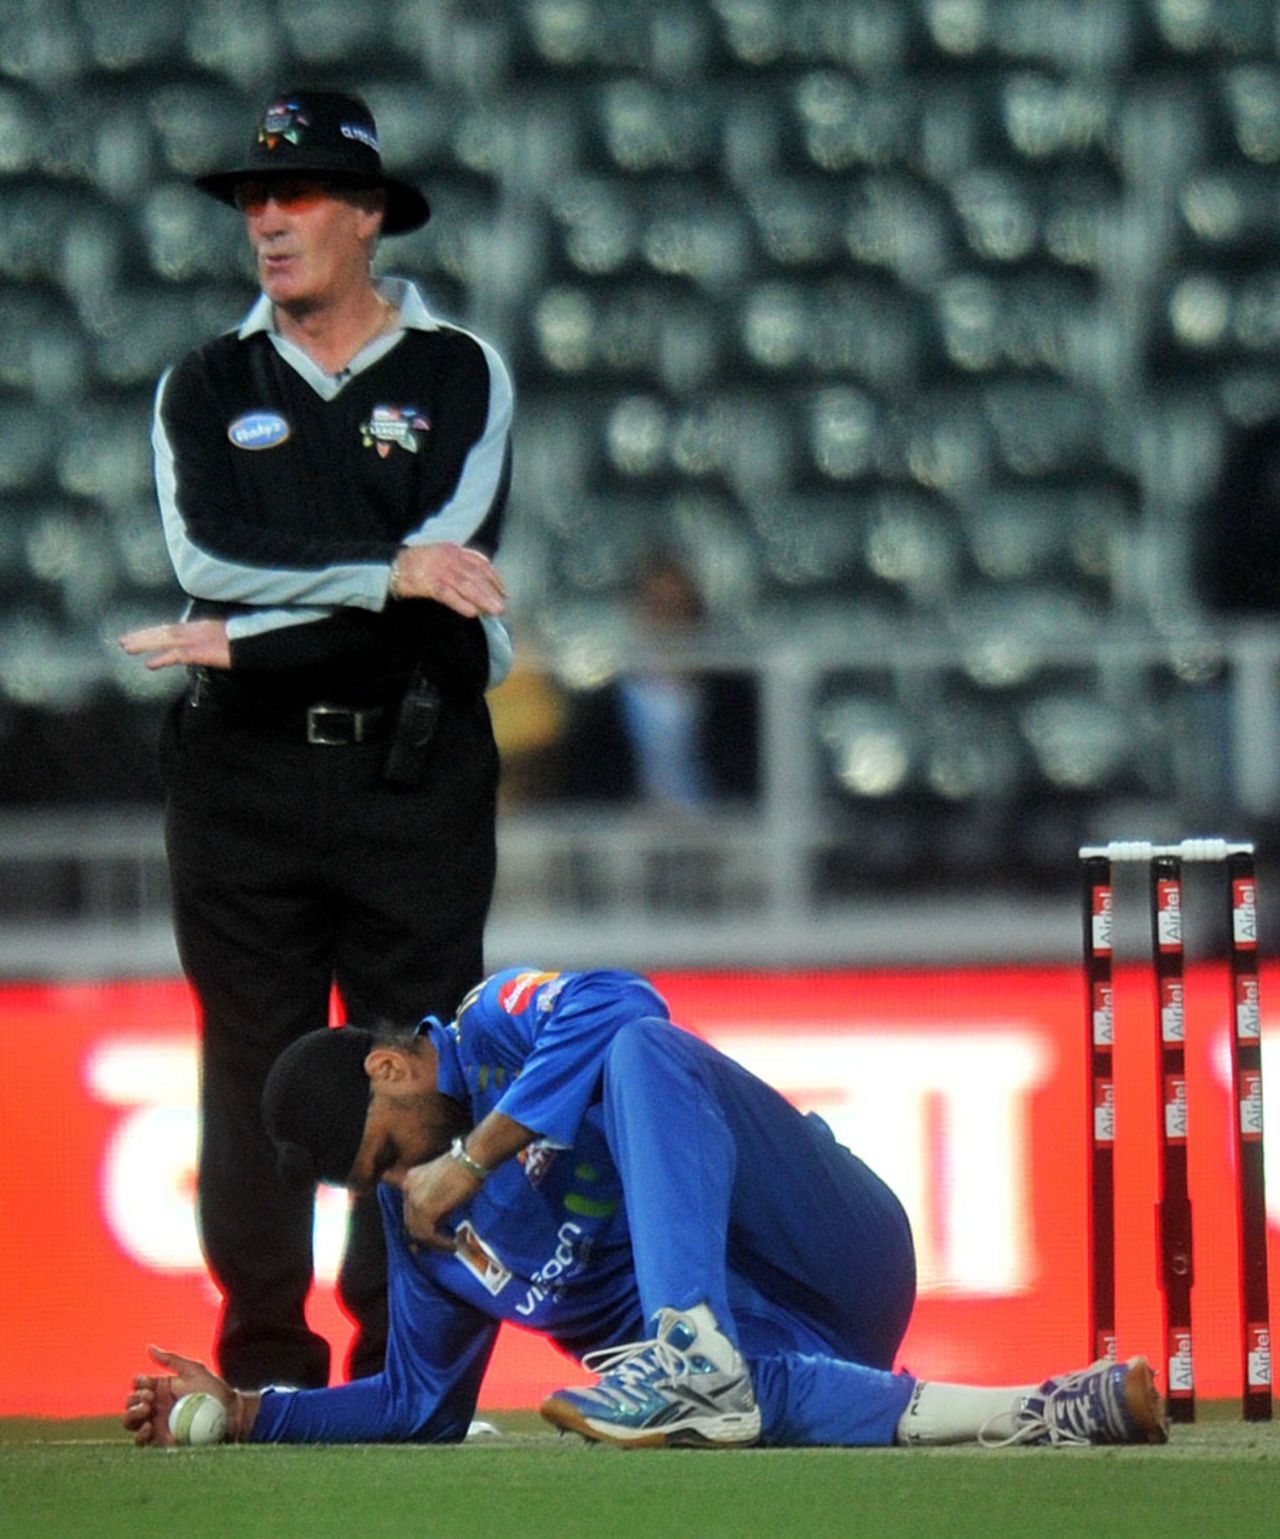 Harbhajan Singh ends up on the ground after slipping in his delivery stride, Lions v Mumbai, Champions League Twenty20, Johannesburg, September 10, 2010